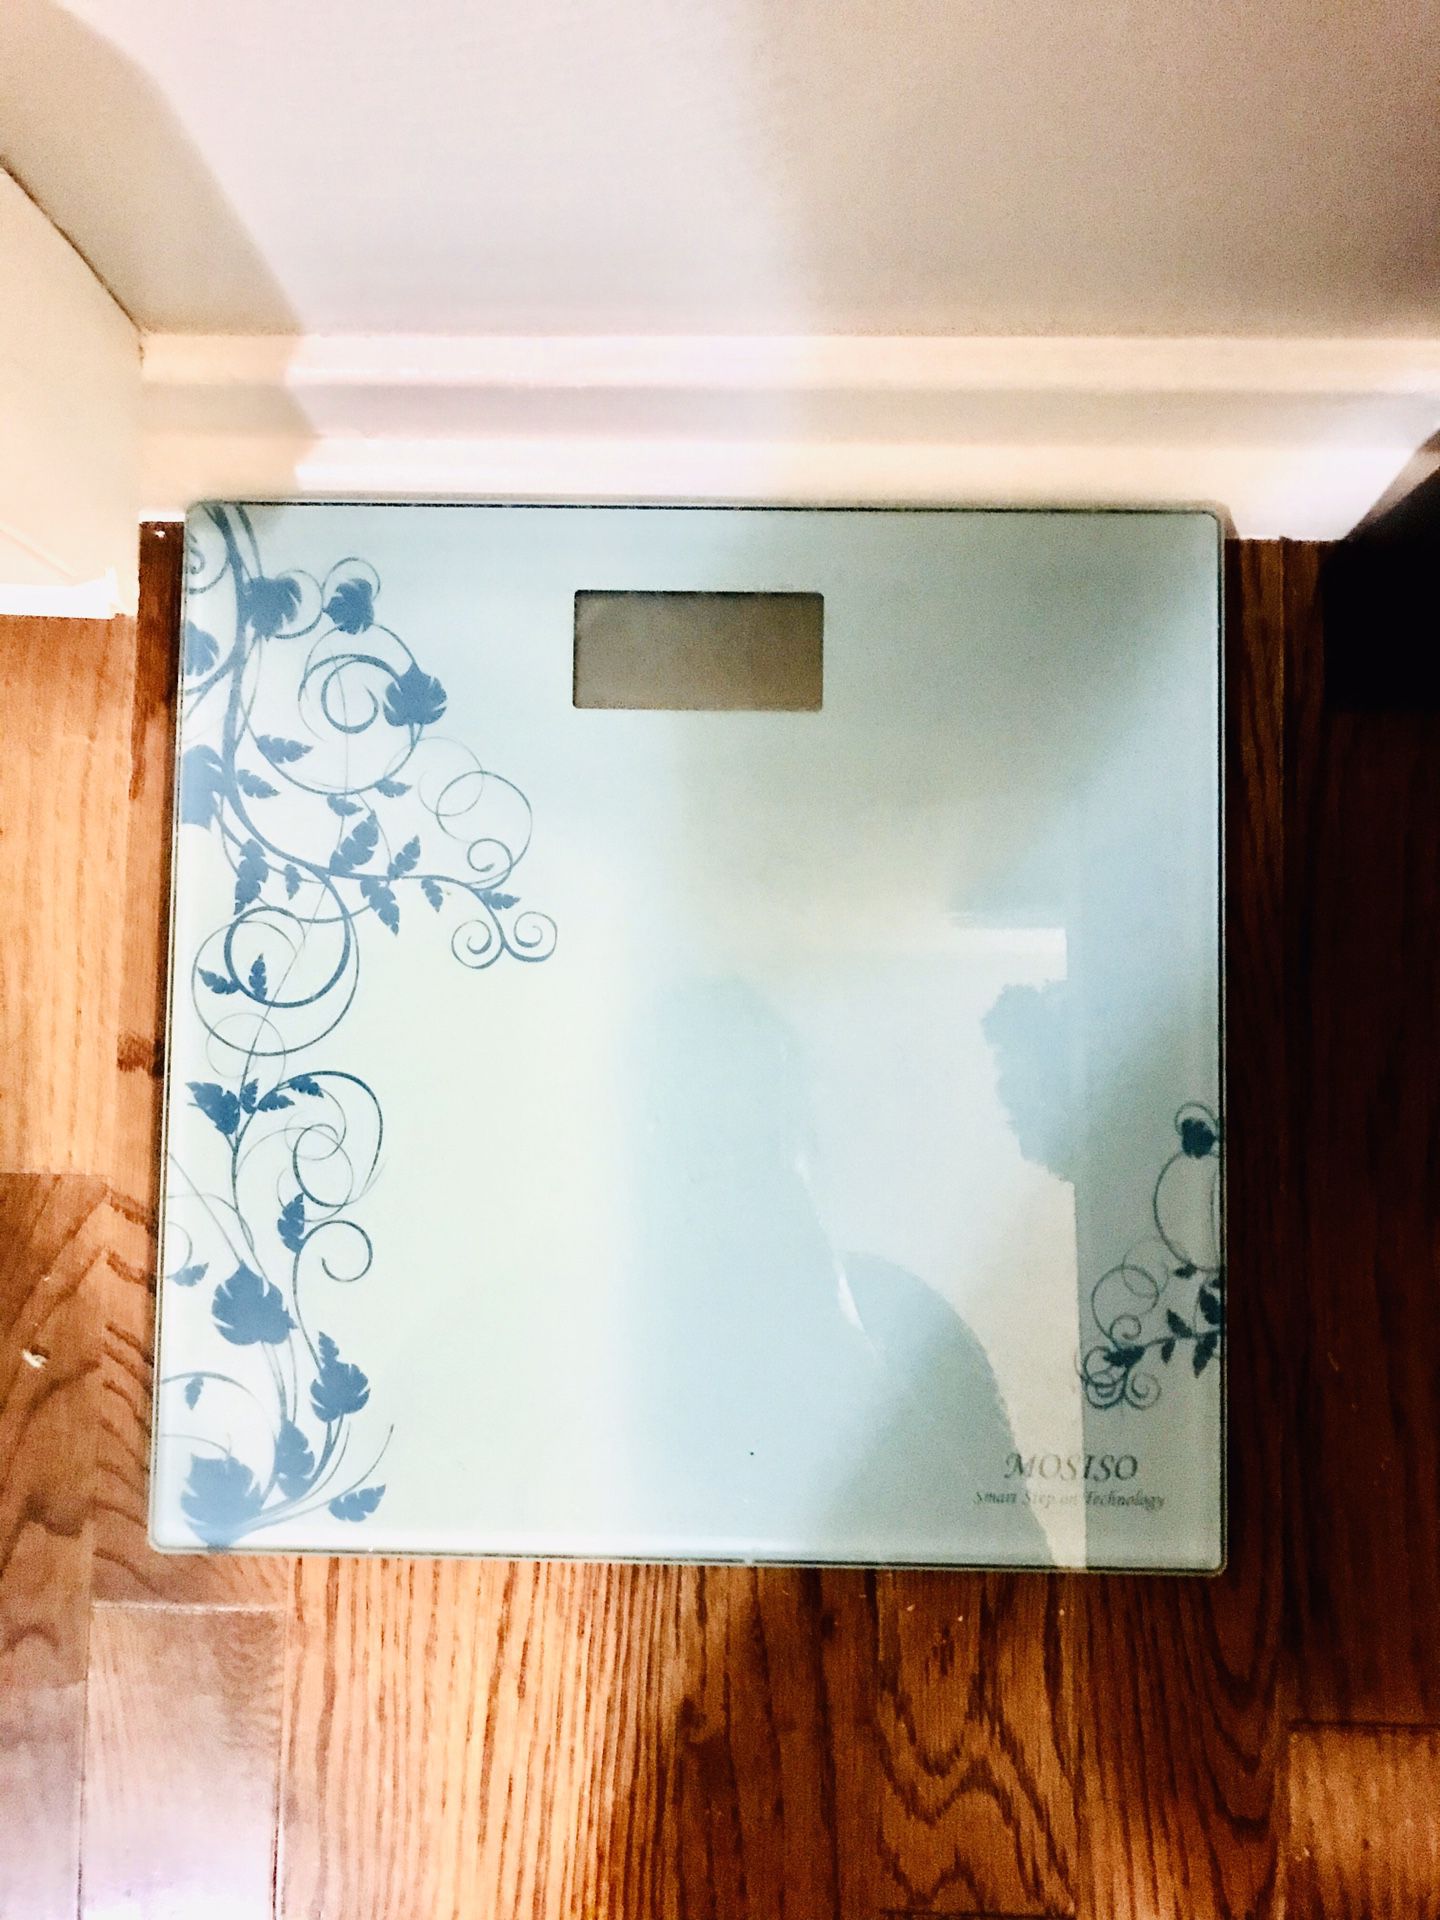 Mosiso Digital Weight Scale